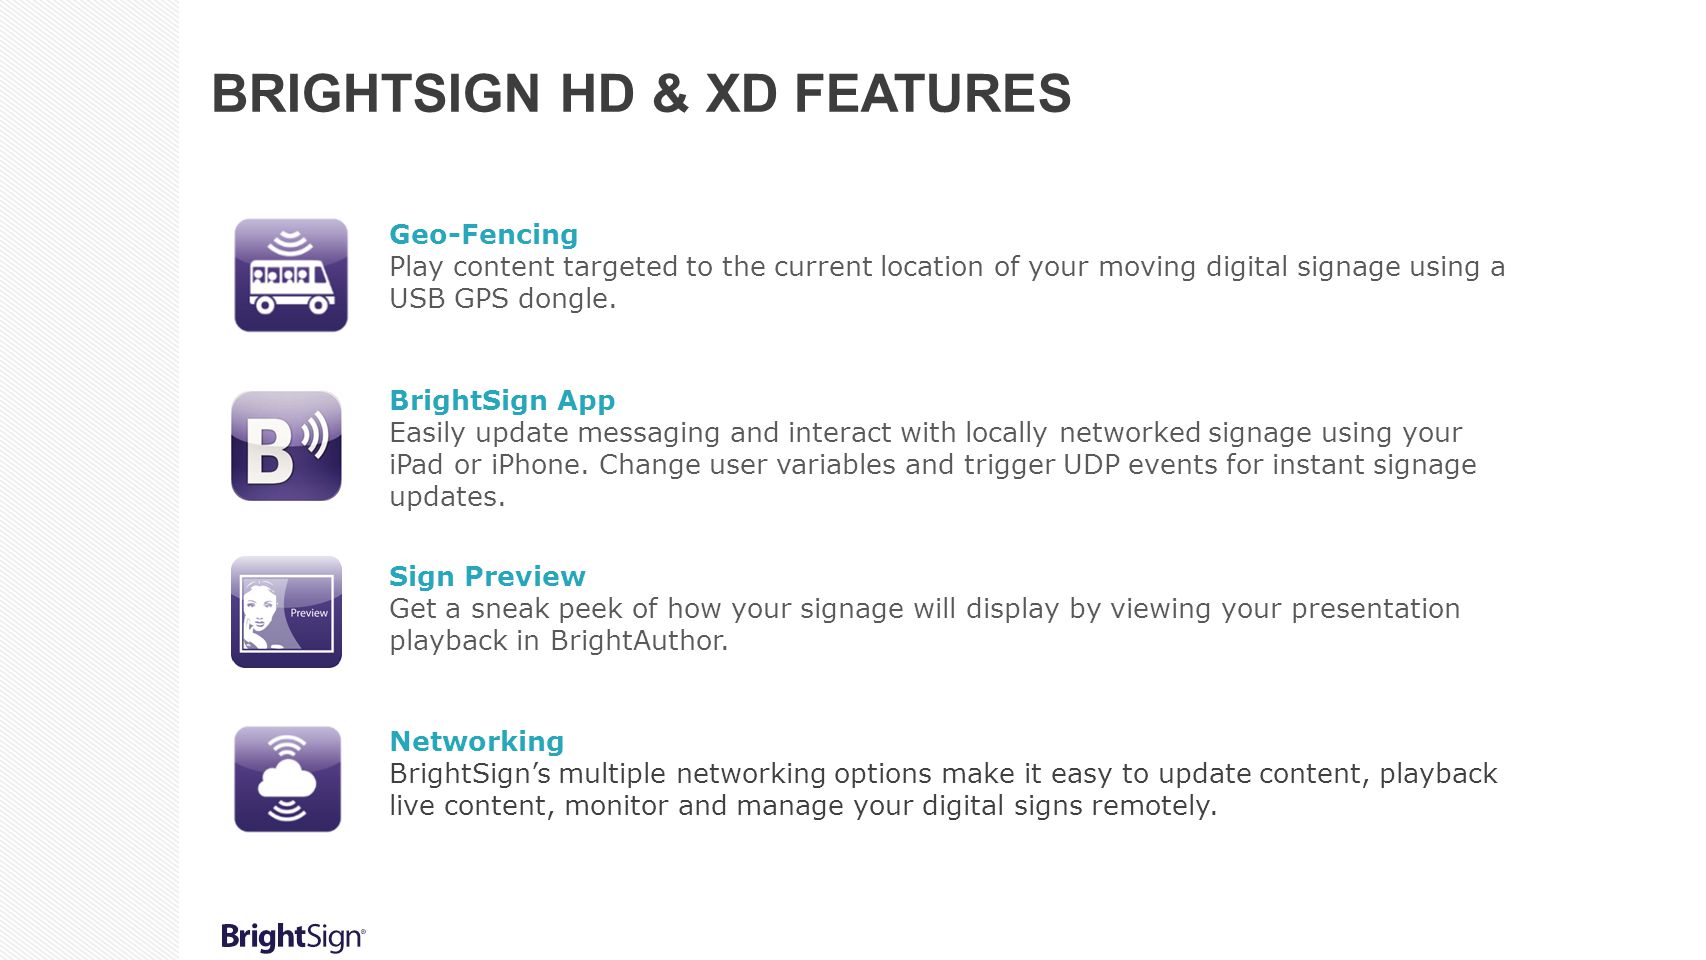 BrightSign HD & XD Features